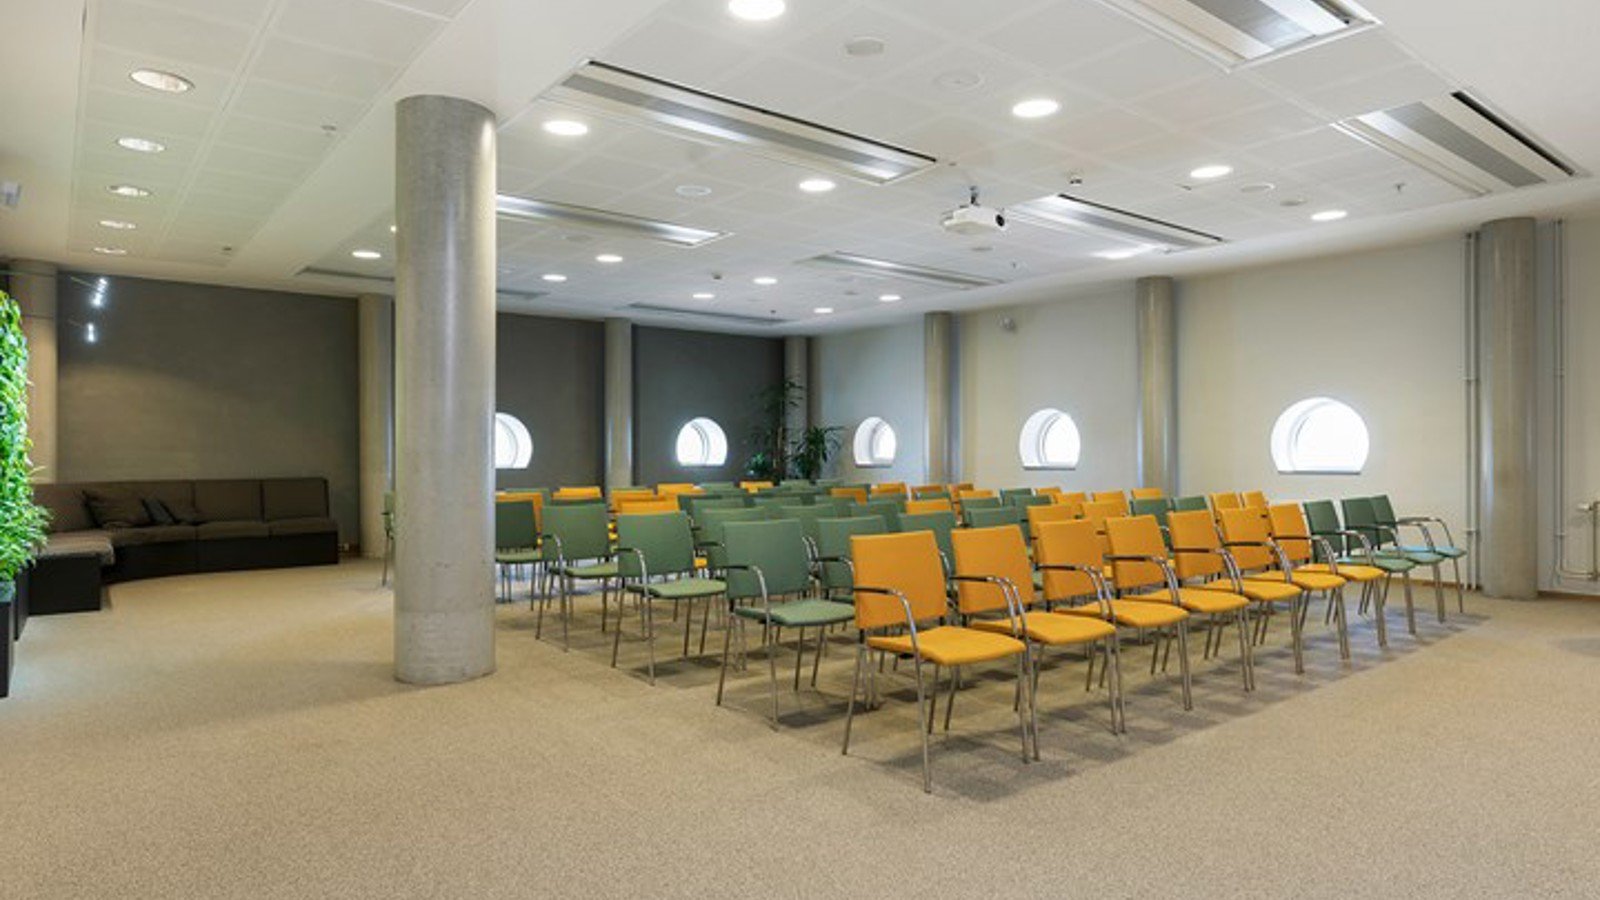 Conference room with cinema seating, yellow and blue chairs and round windows